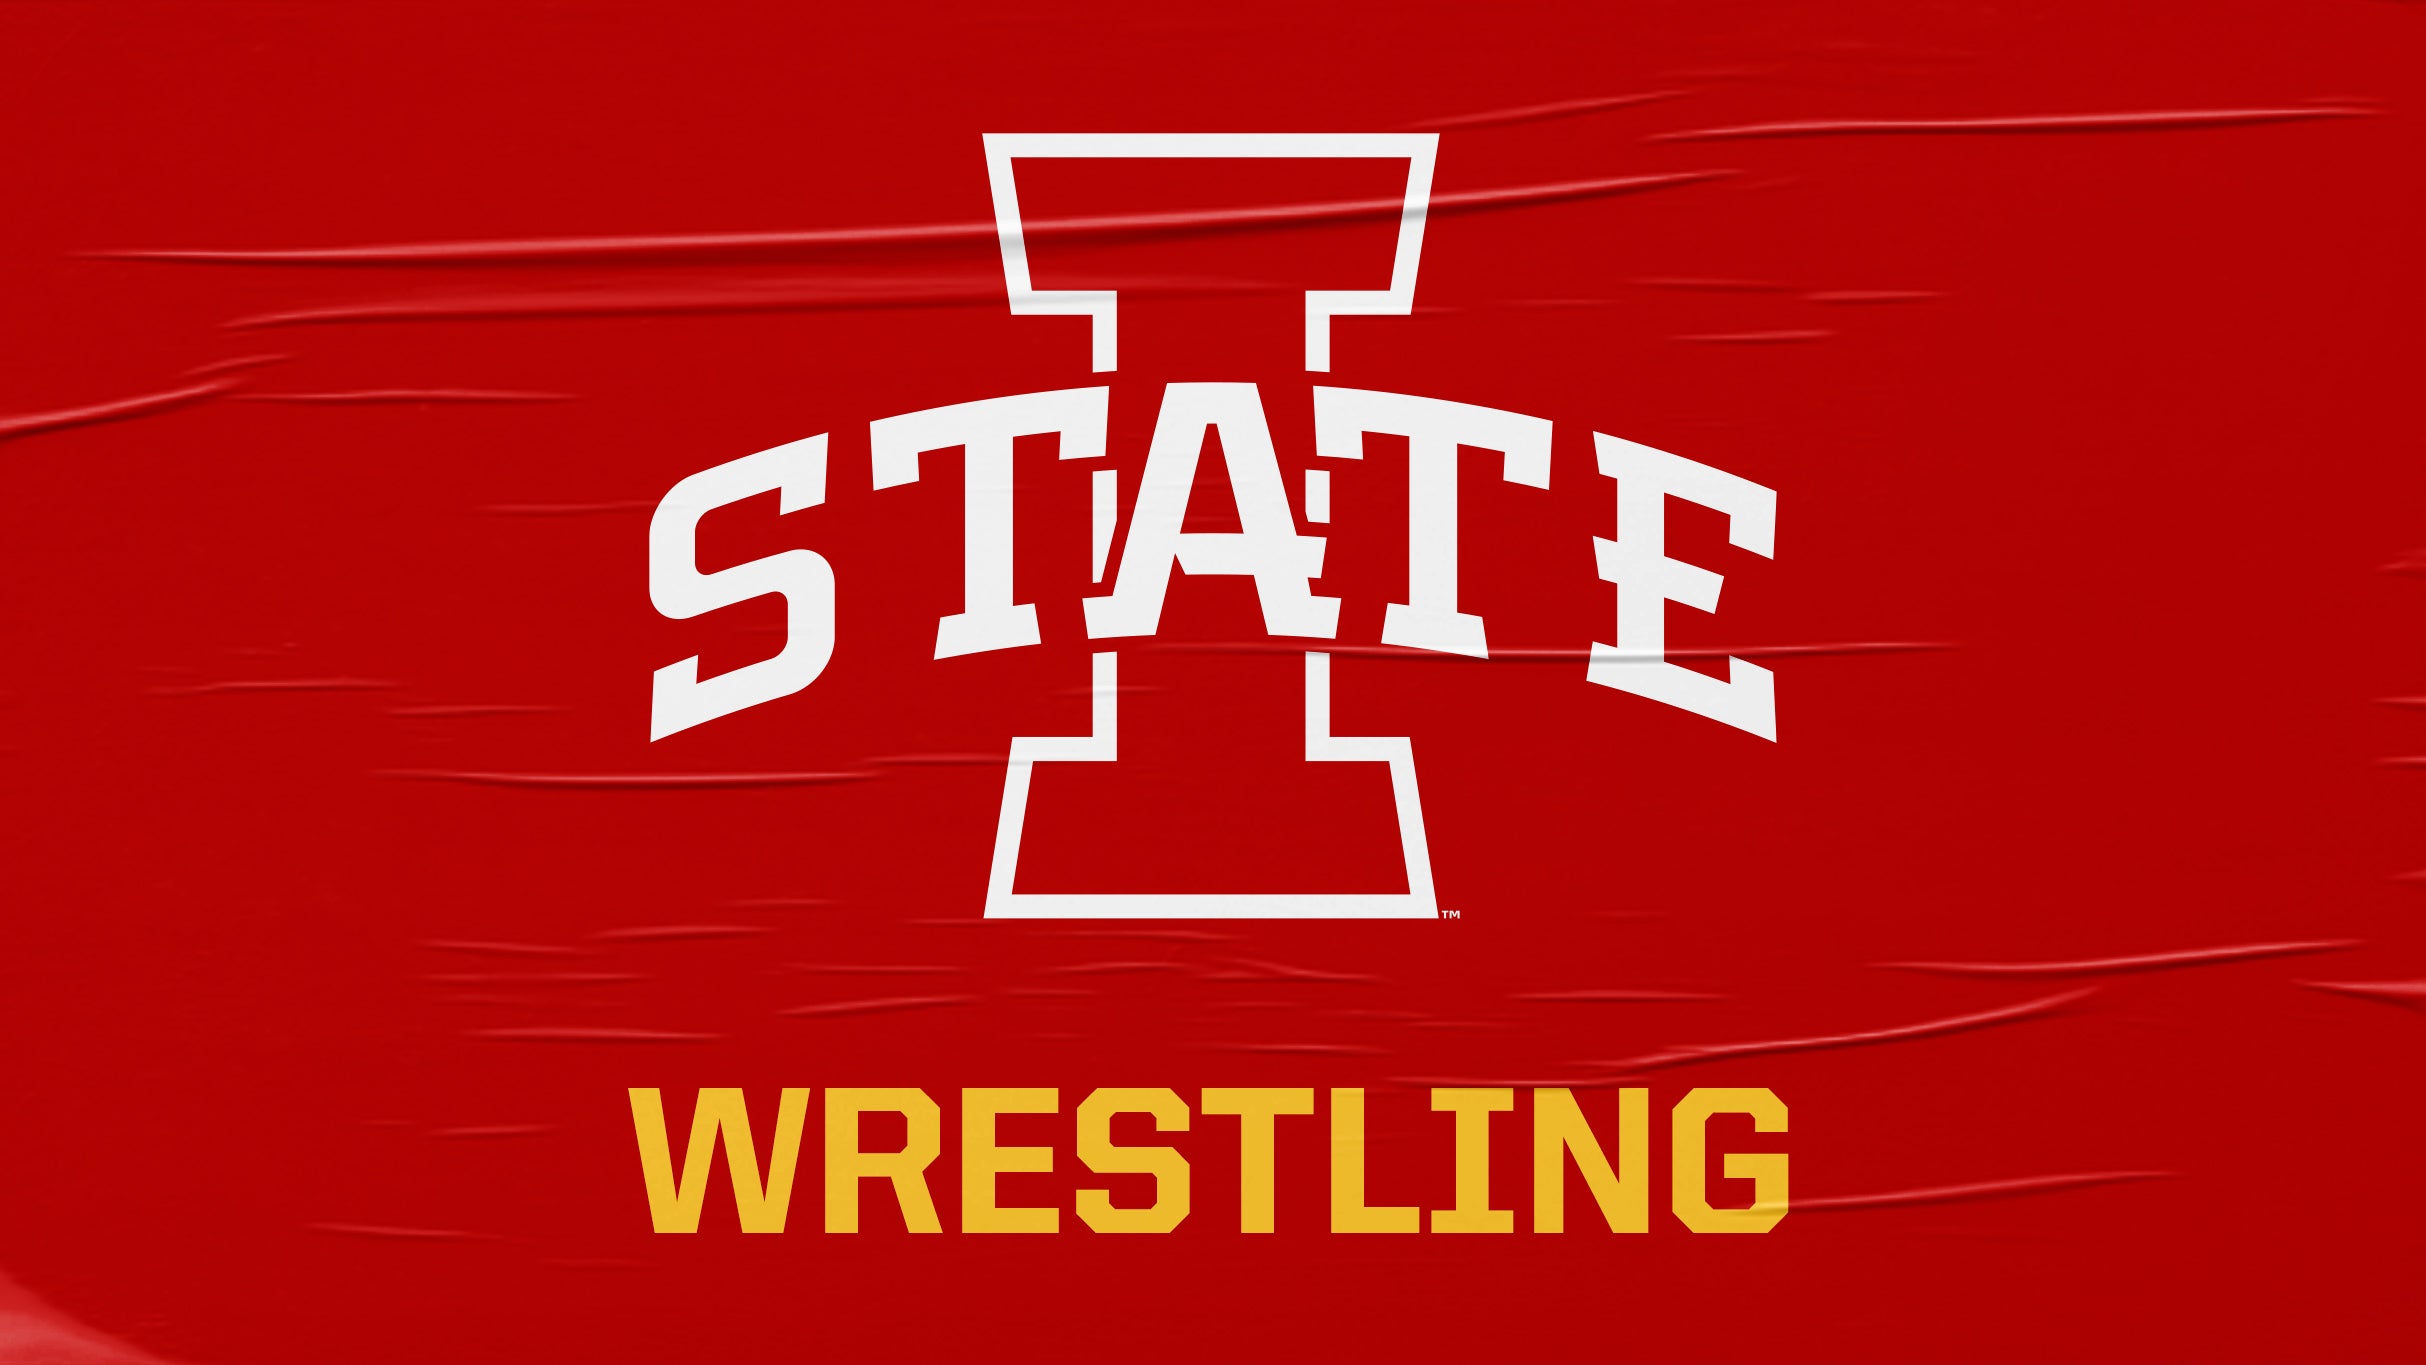 Iowa State Cyclones Wrestling vs. West Virginia University Wrestling in Ames promo photo for Resale Onsale presale offer code